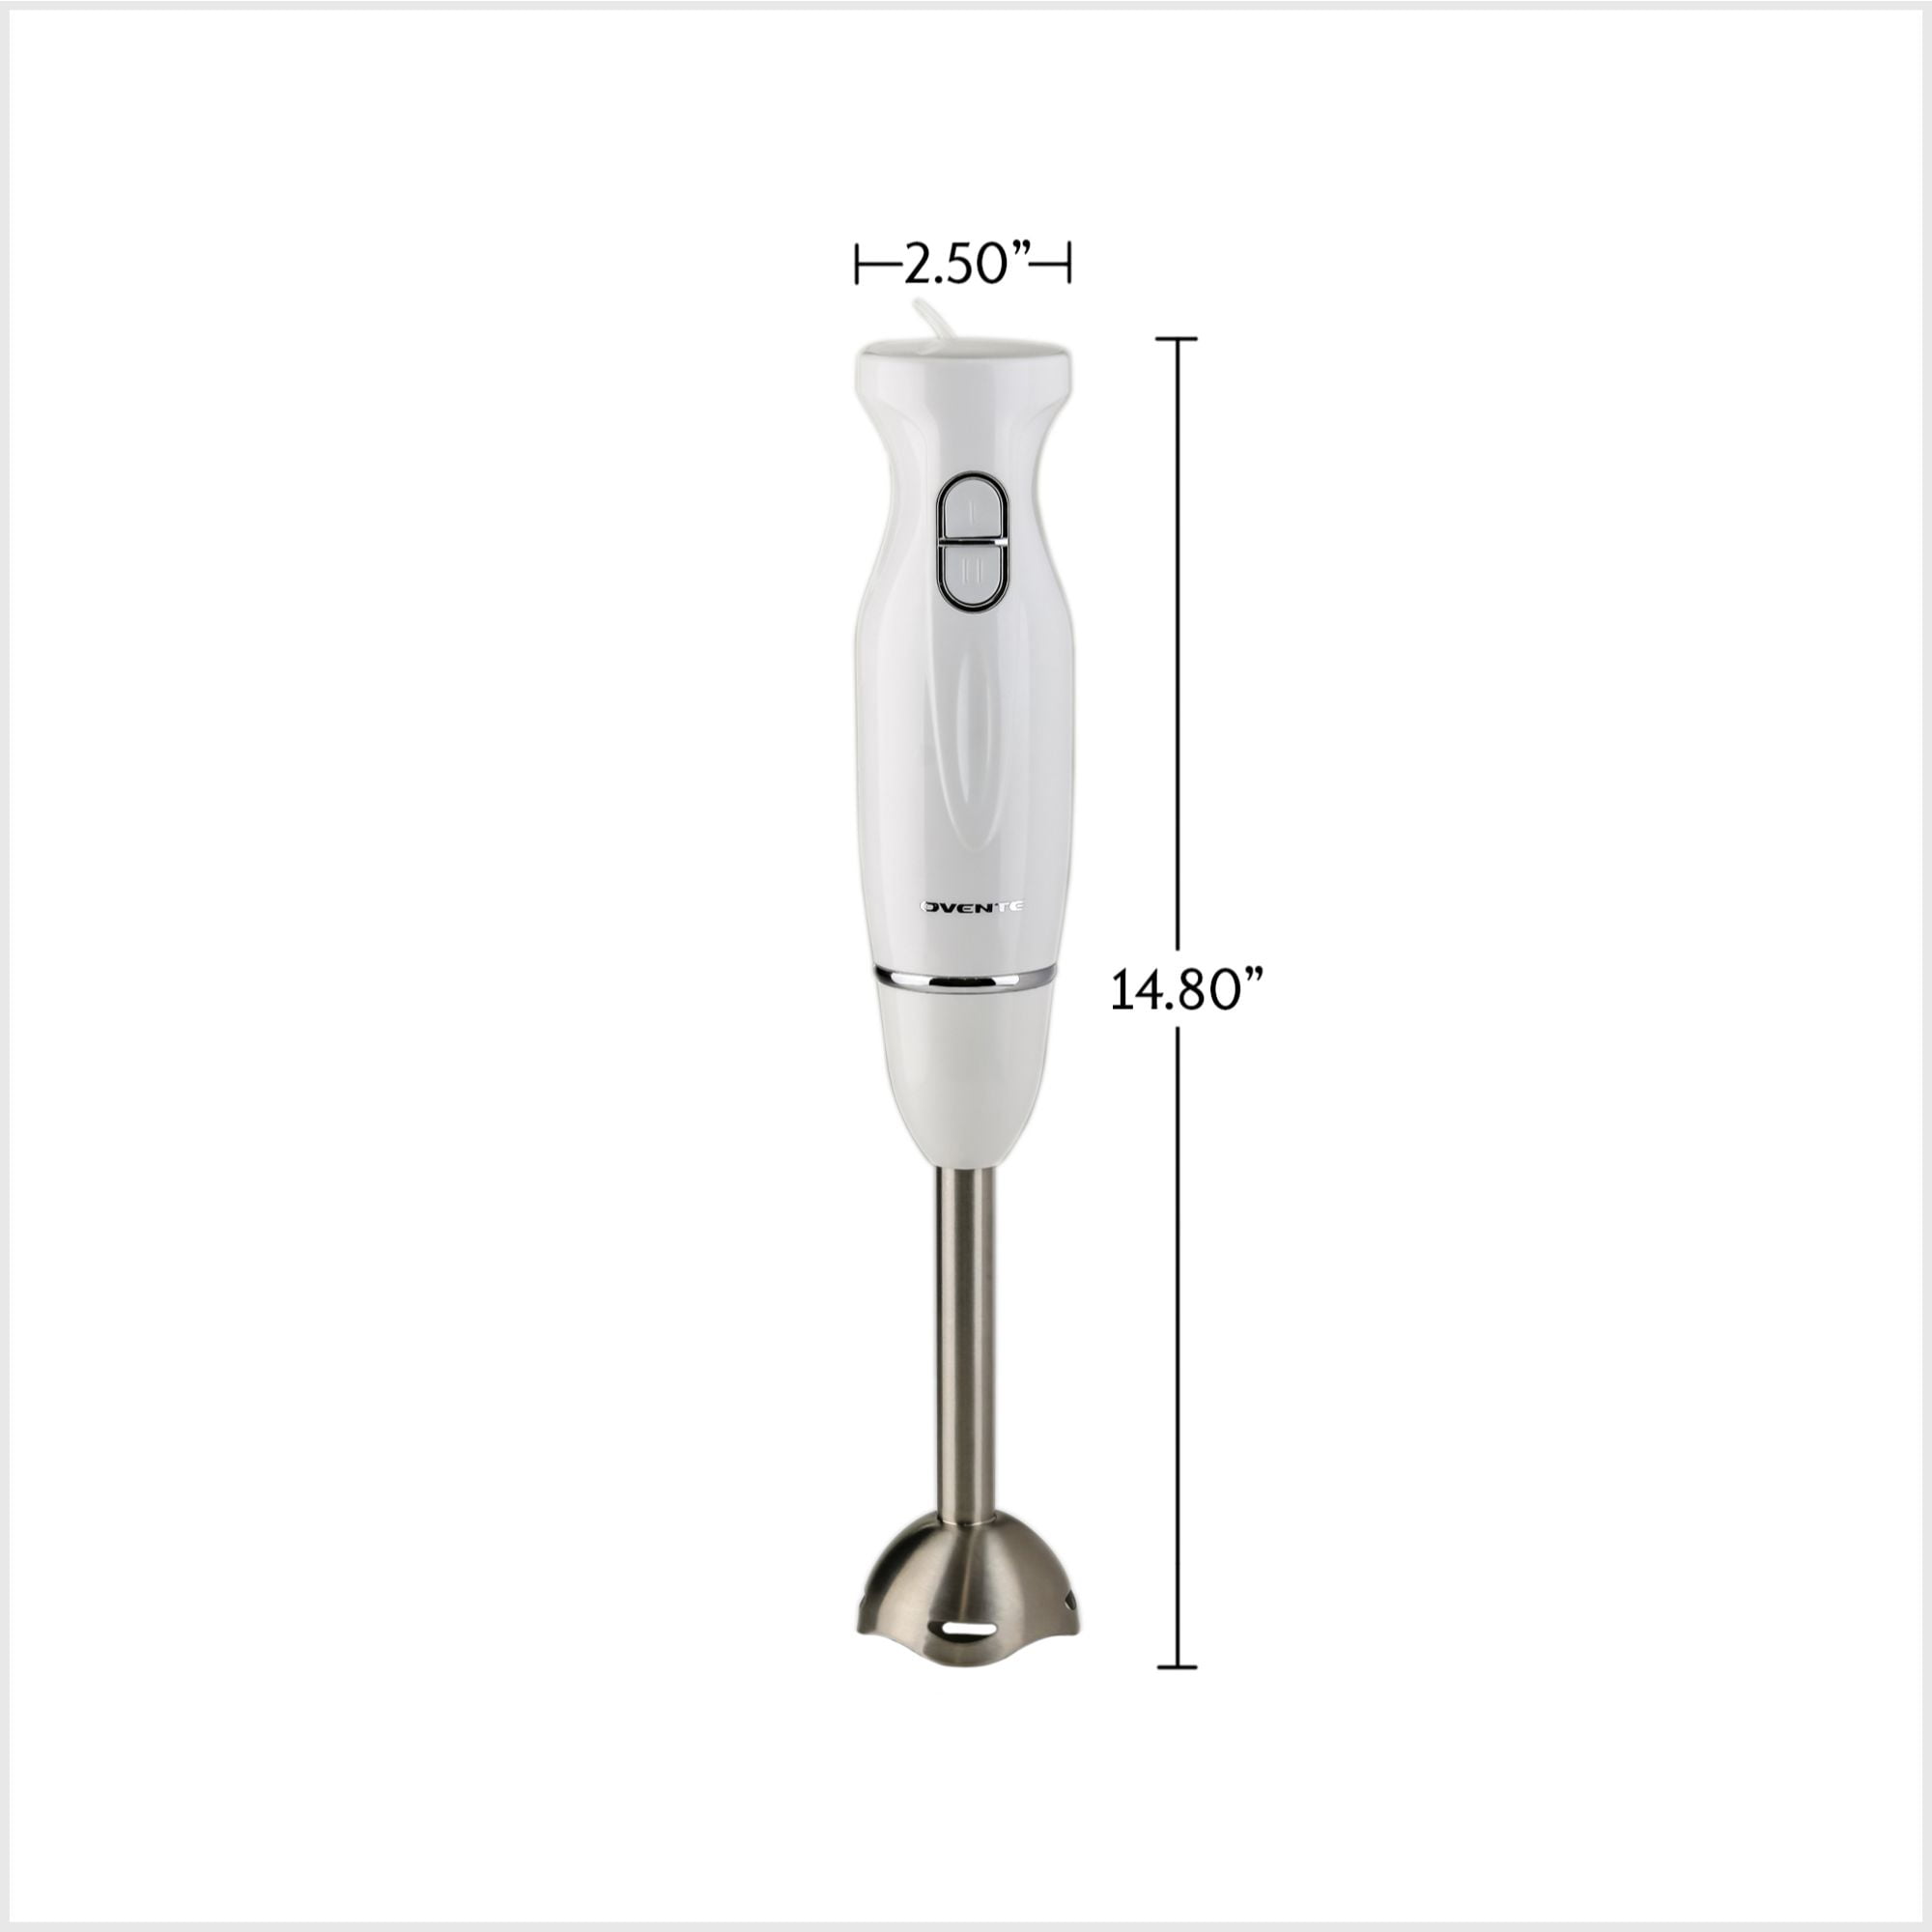 OVENTE Ultra-Stick 2-Speed Red Hand Immersion Blender Set with  Whisk+Beaker+Chopper HS565R - The Home Depot